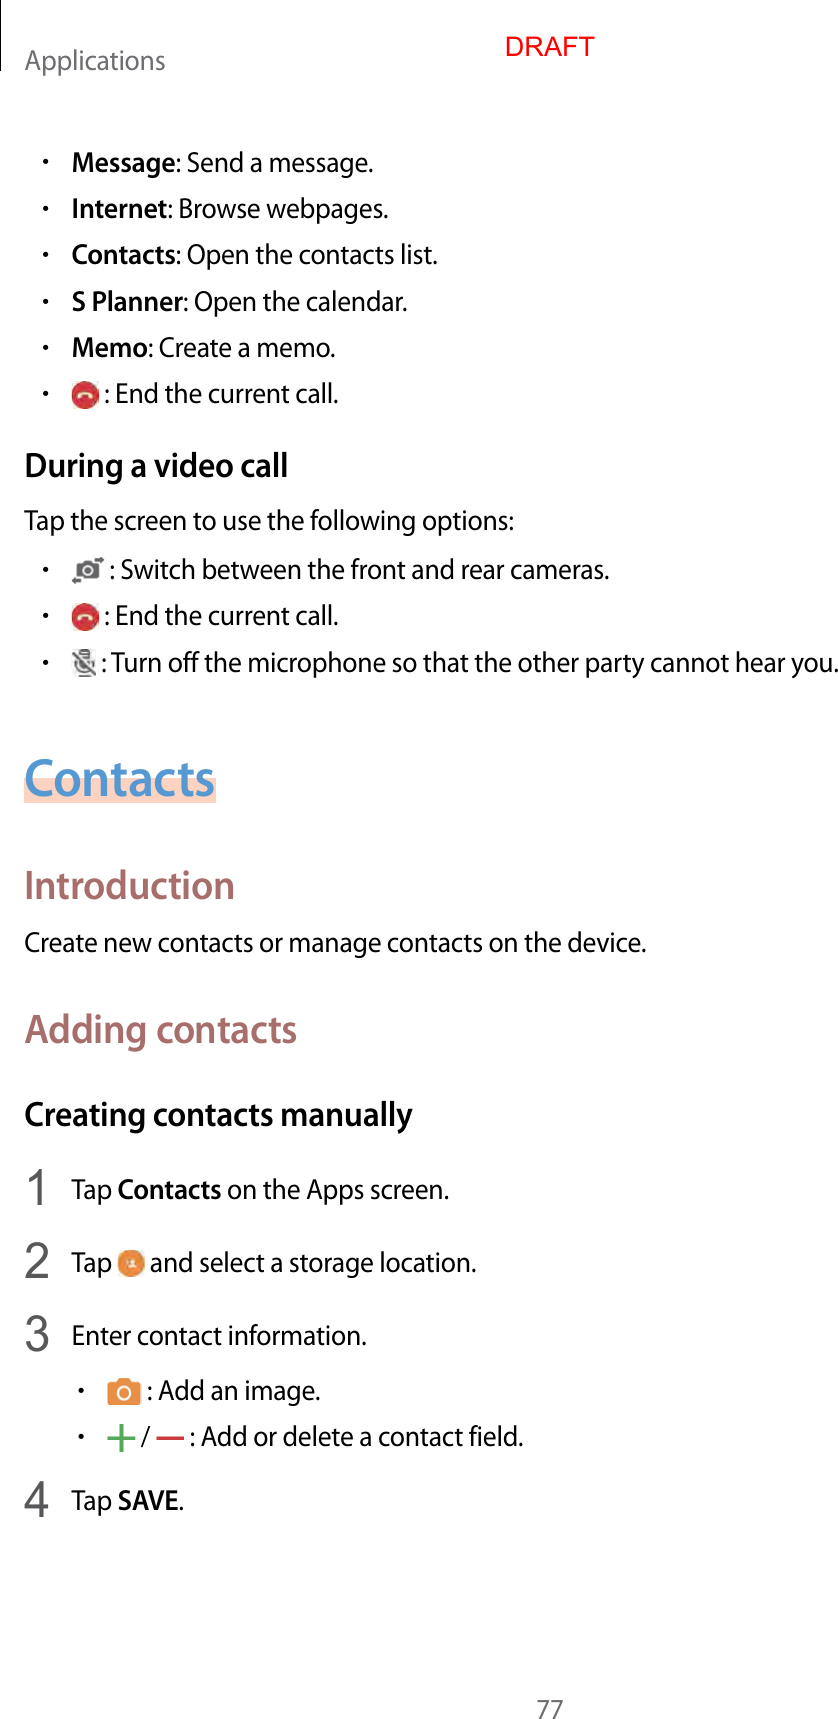 Applications77•Message: Send a message.•Internet: Browse webpages.•Contacts: Open the contacts list.•S Planner: Open the calendar.•Memo: Create a memo.• : End the current call.During a video callTap the screen to use the following options:• : Switch between the front and rear cameras.• : End the current call.• : Turn off the microphone so that the other party cannot hear you.ContactsIntroductionCreate new contacts or manage contacts on the device.Adding contactsCreating contacts manually1  Tap Contacts on the Apps screen.2  Tap   and select a storage location.3  Enter contact information.• : Add an image.• /   : Add or delete a contact field.4  Tap SAVE.DRAFT